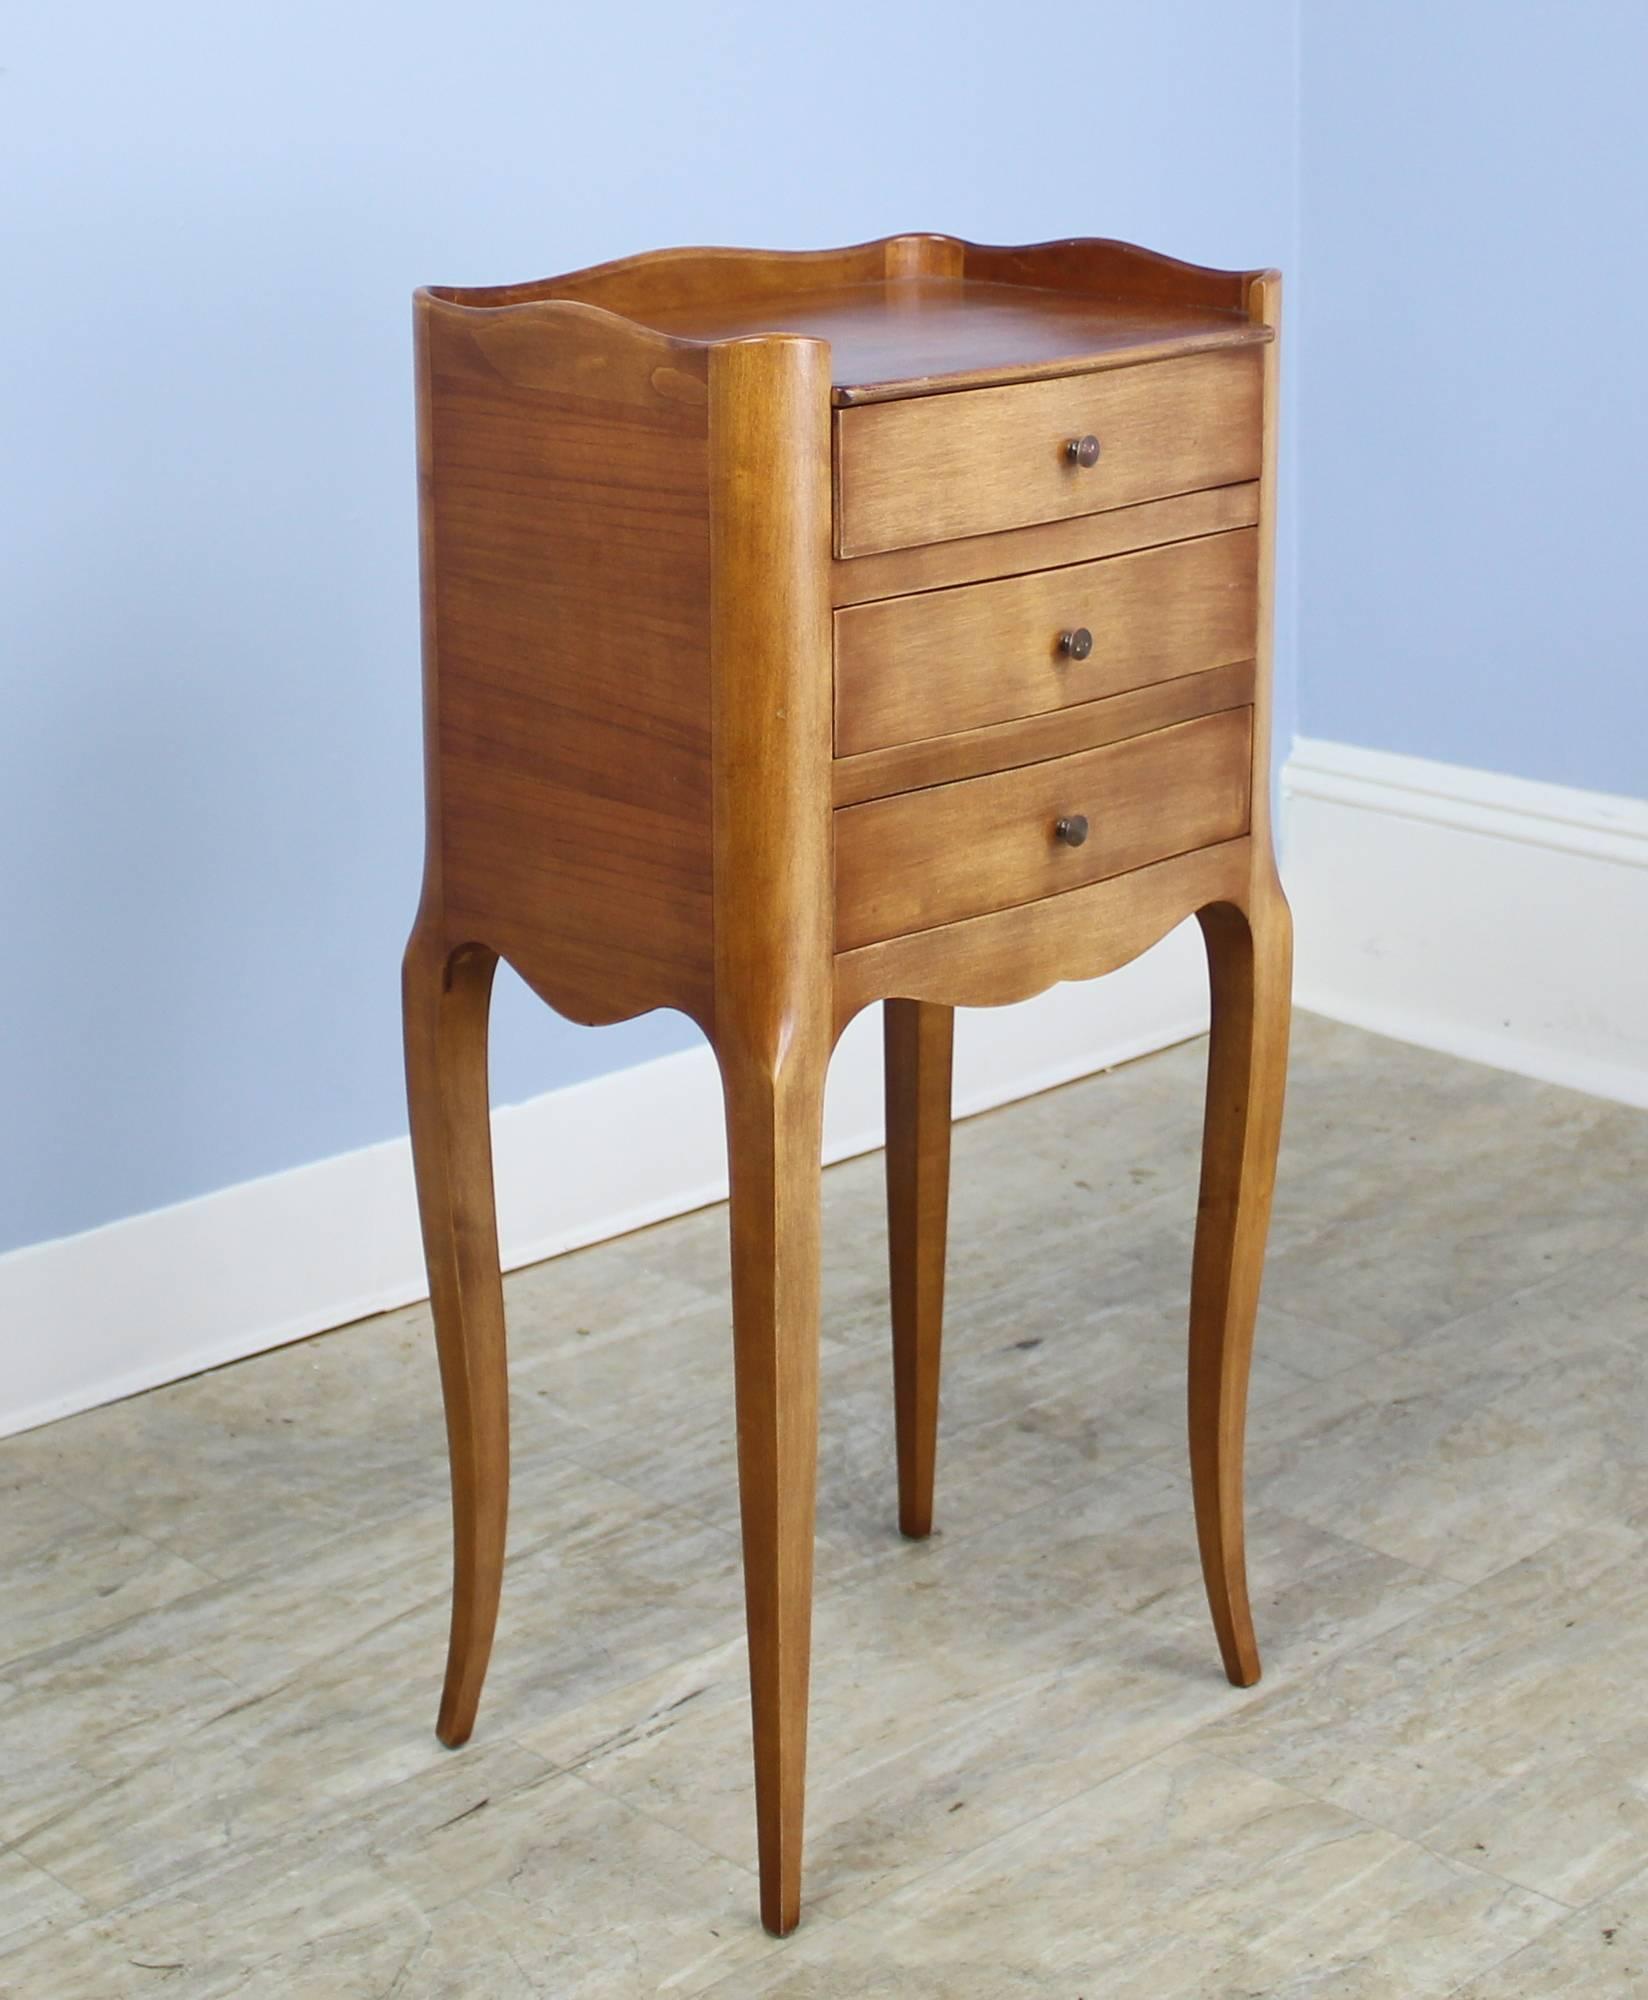 A pair of fine charming cherry nightstands with three sweet drawers and gracefully curved cabriole legs. The tops are in very good condition, with a small gallery on three of the four sides. Wonderful color and good cherry grain.